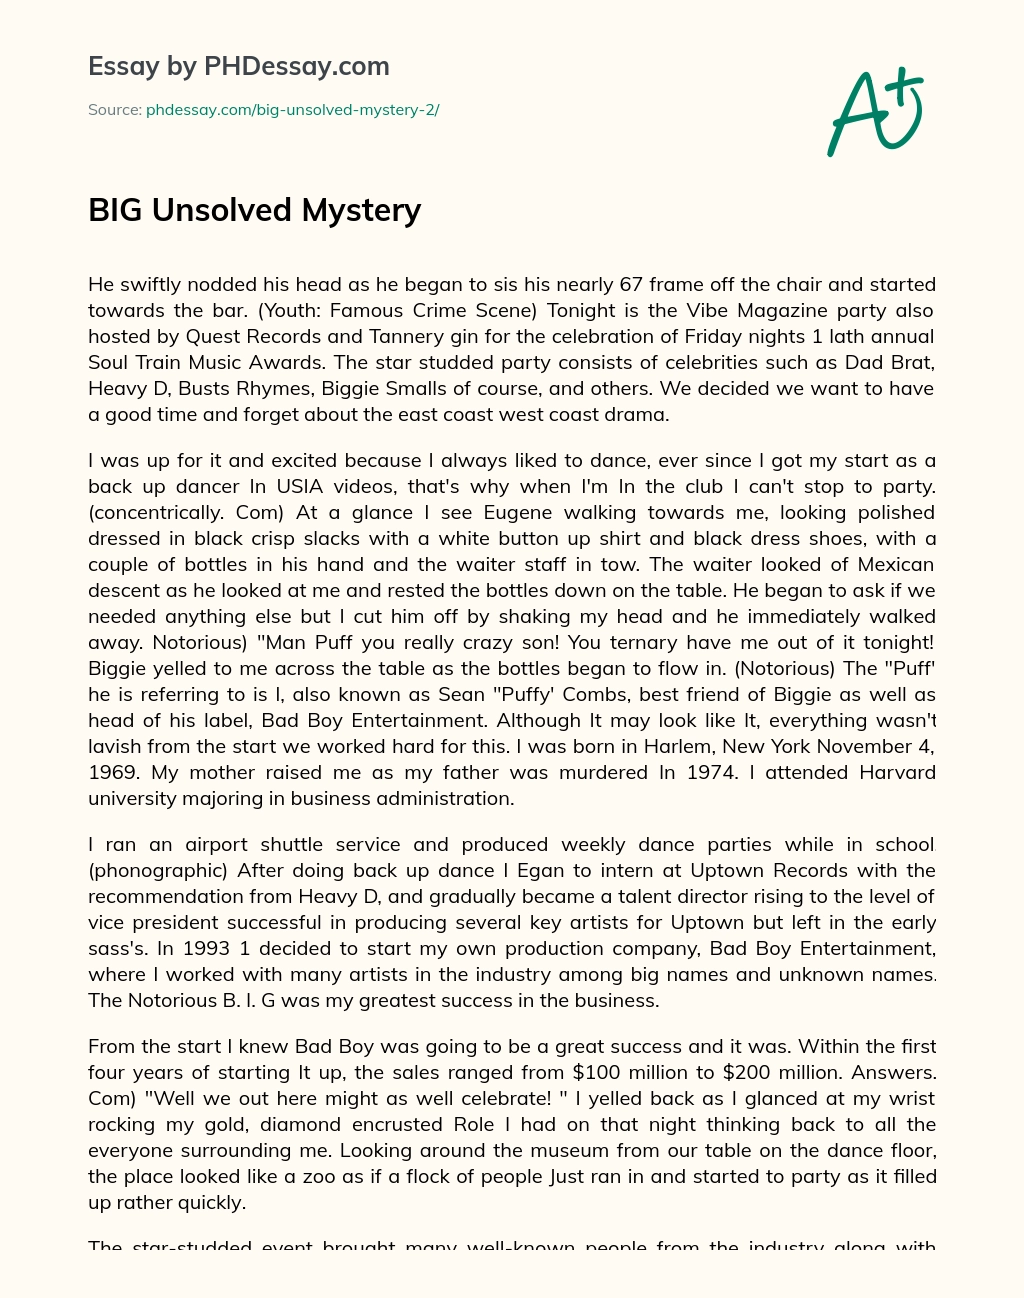 BIG Unsolved Mystery essay